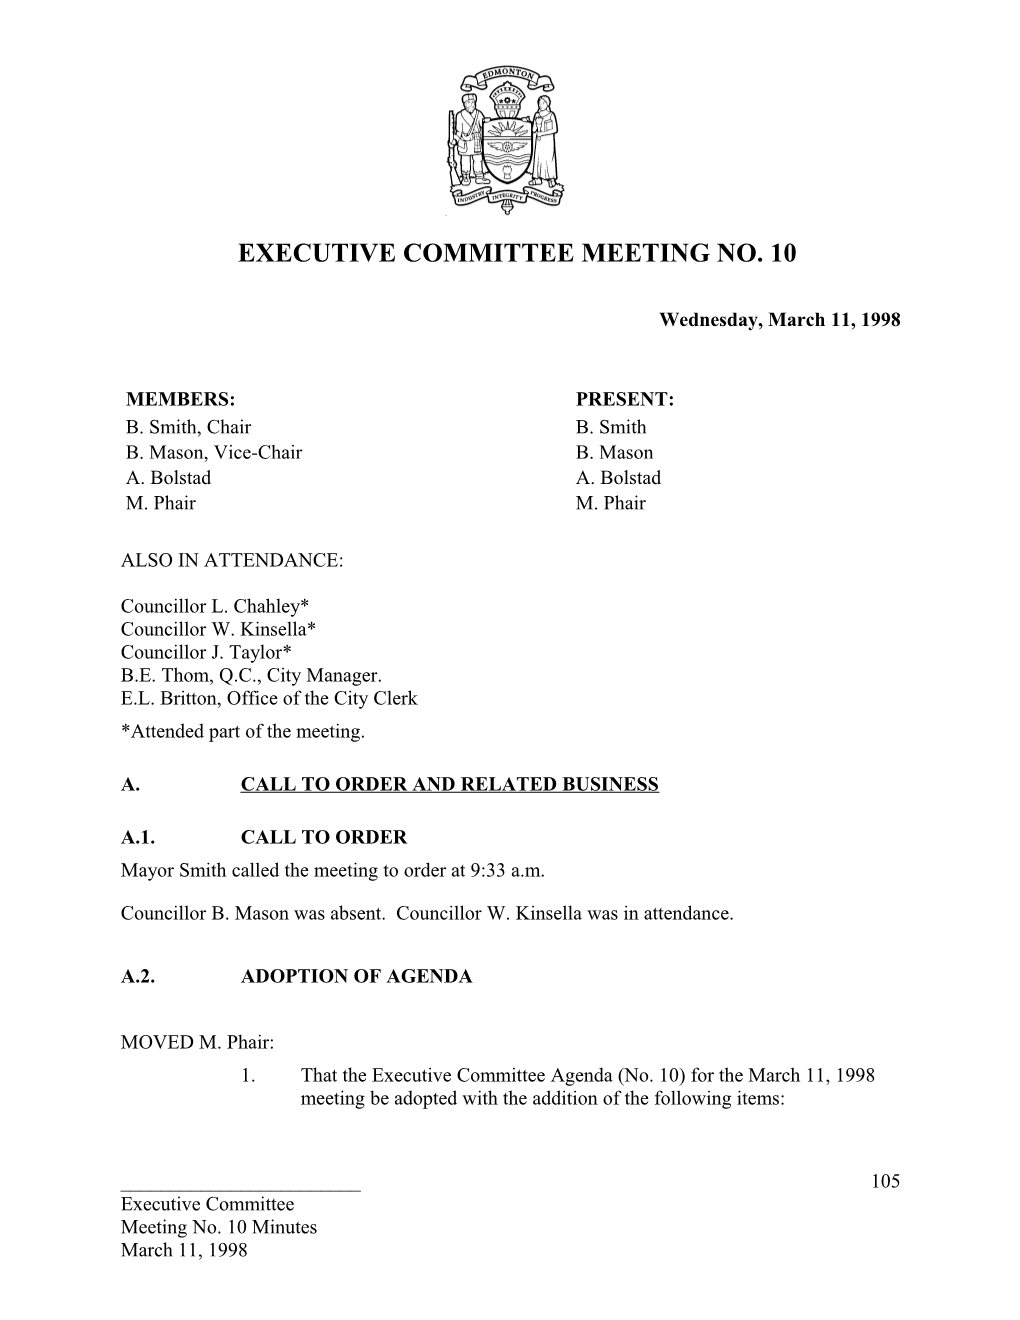 Minutes for Executive Committee March 11, 1998 Meeting